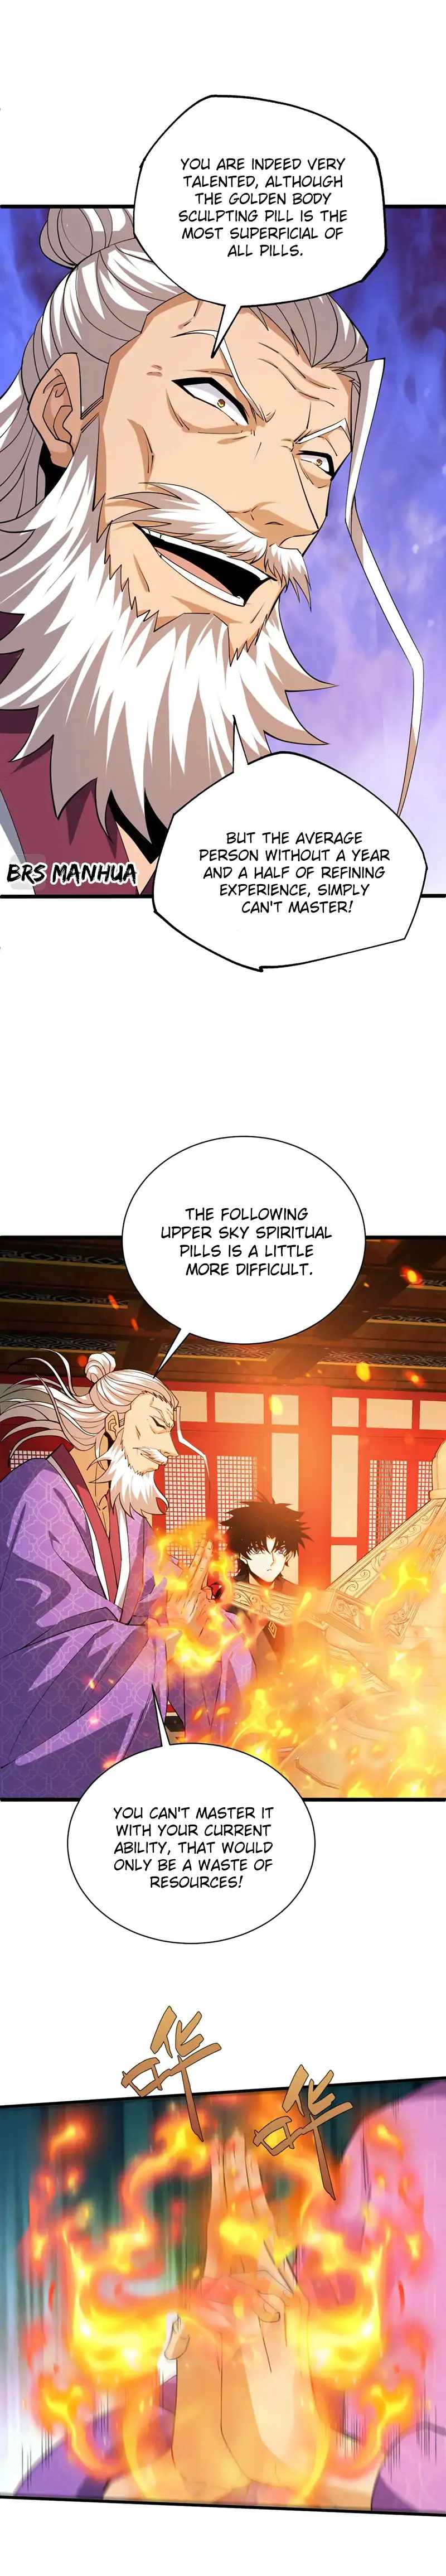 Fighting Again For A Lifetime (Return of the Youngest Grandmaster) Chapter 53-eng-li - Page 16